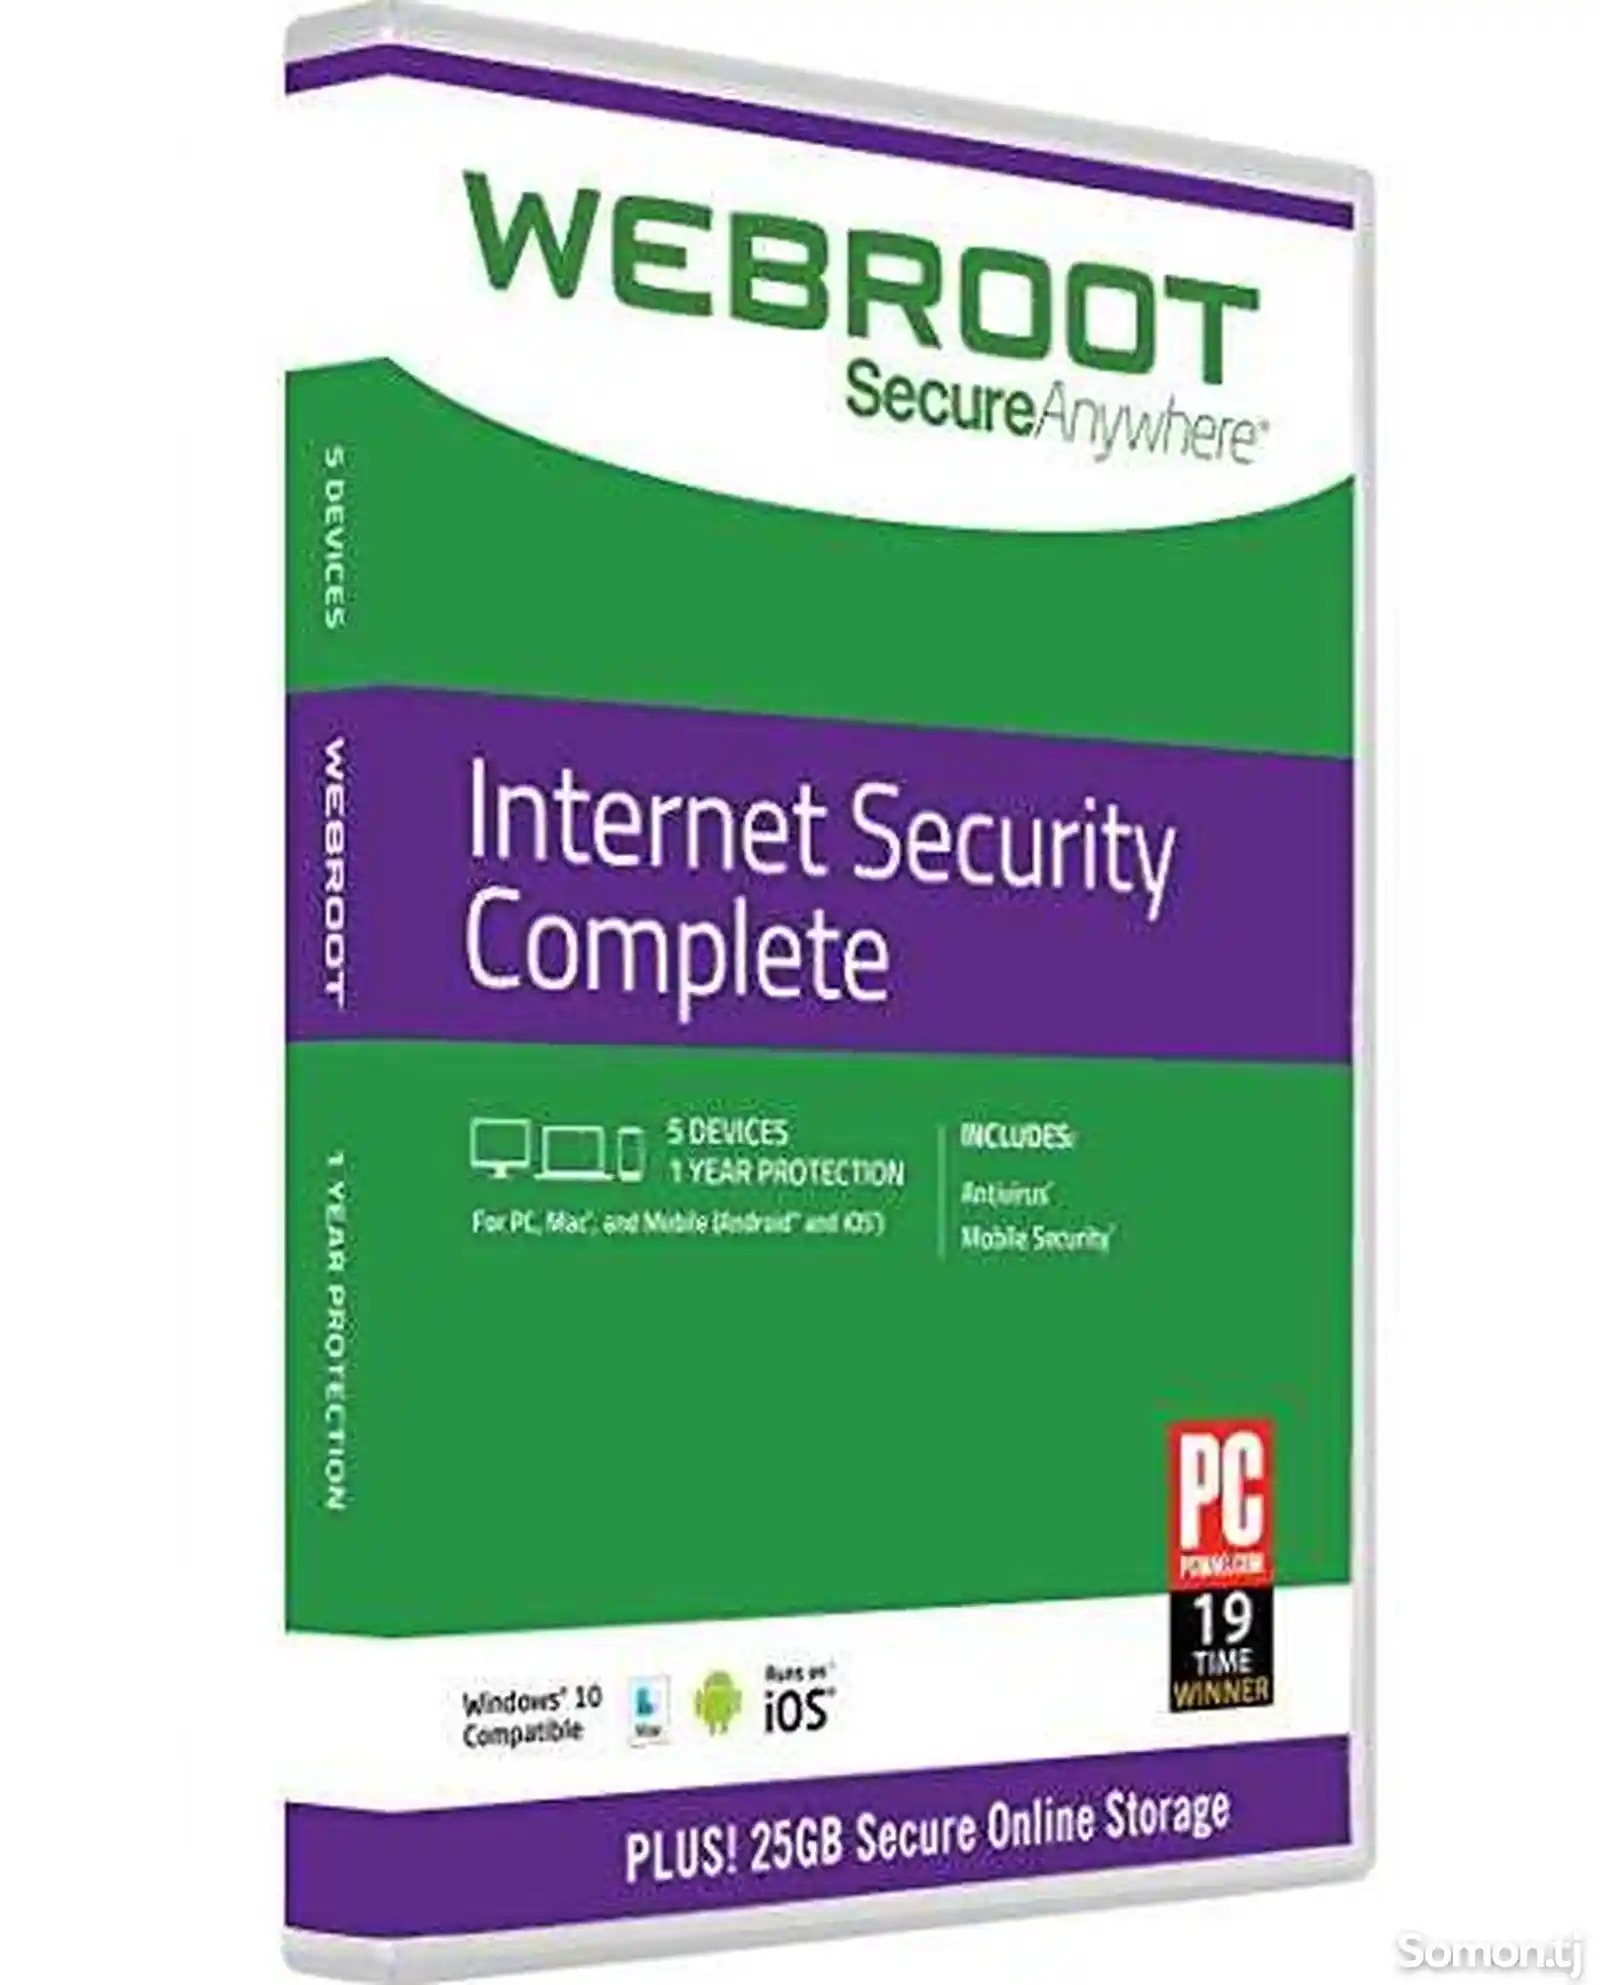 Webroot SecureAnywhere Complete - иҷозатнома барои 5 роёна, 1 сол